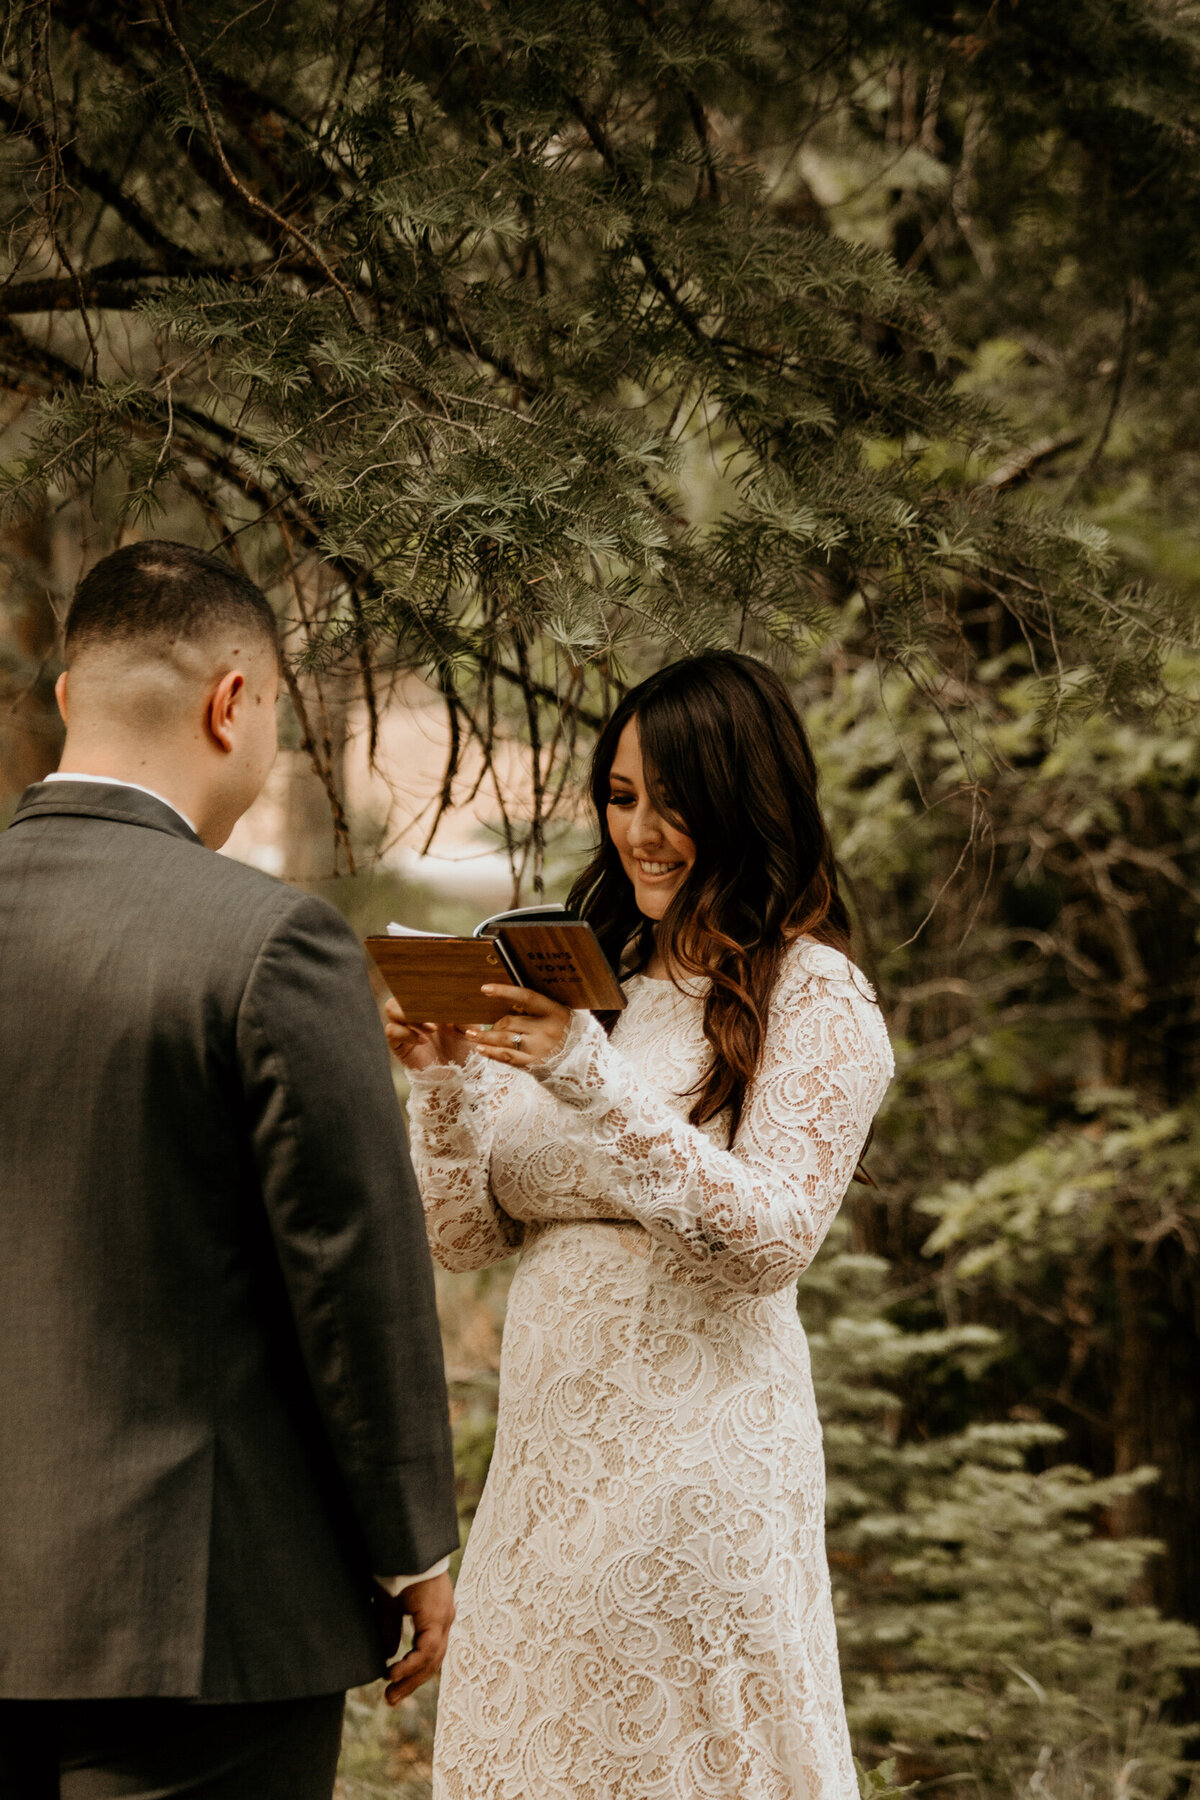 bride and groom exchanging private vows in the forest in Cedar Crest New Mexico